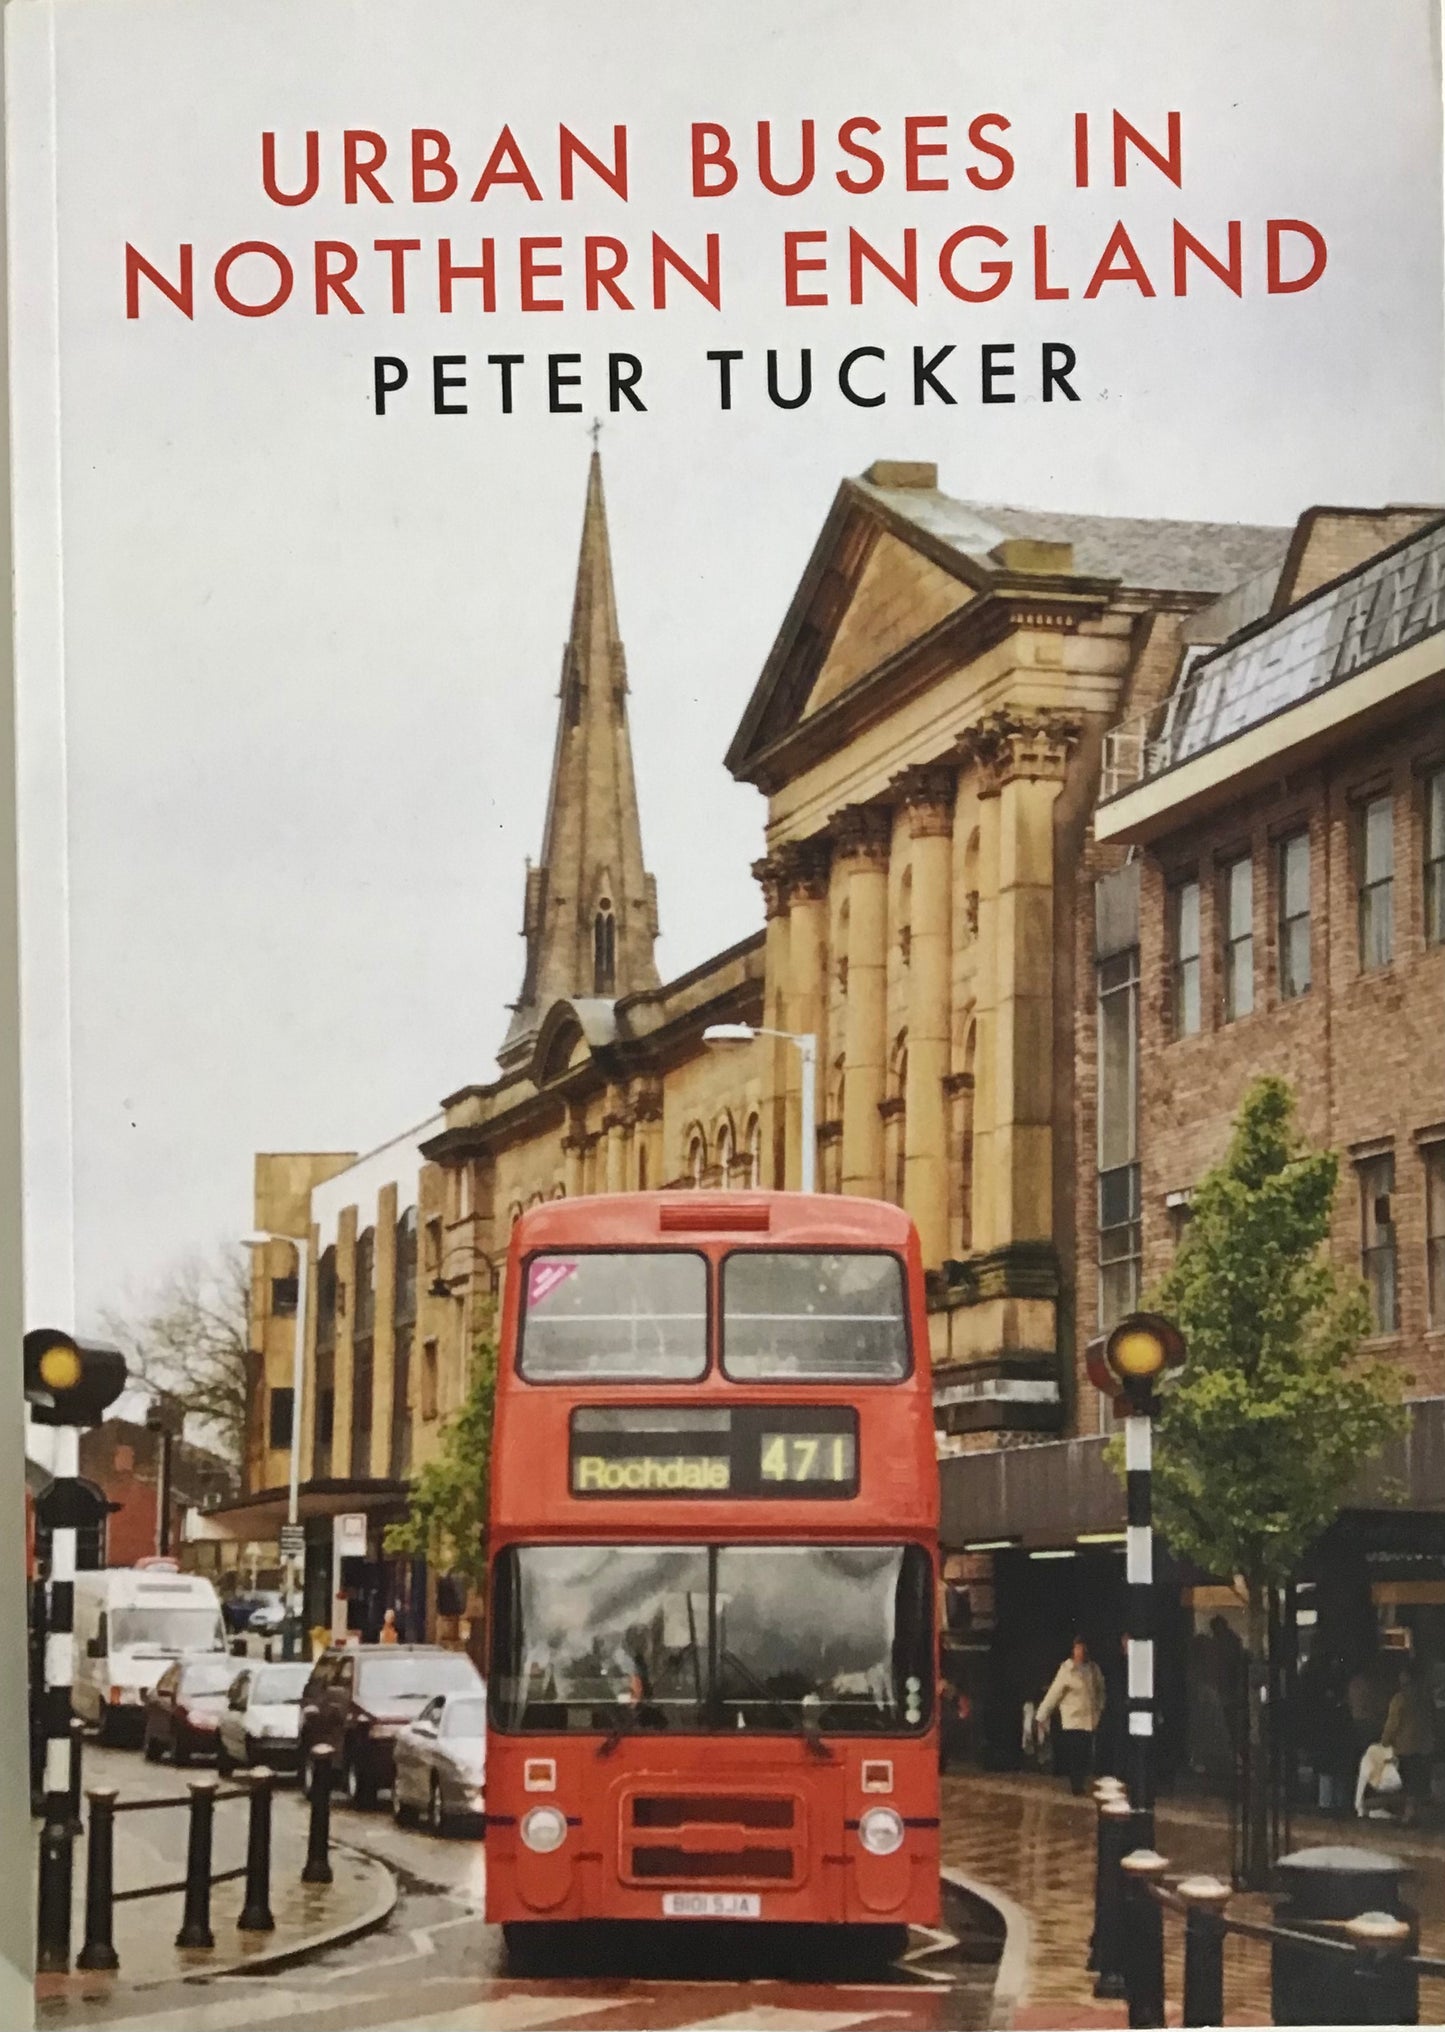 Urban Buses in Northern England - Peter Tucker - Chester Model Centre